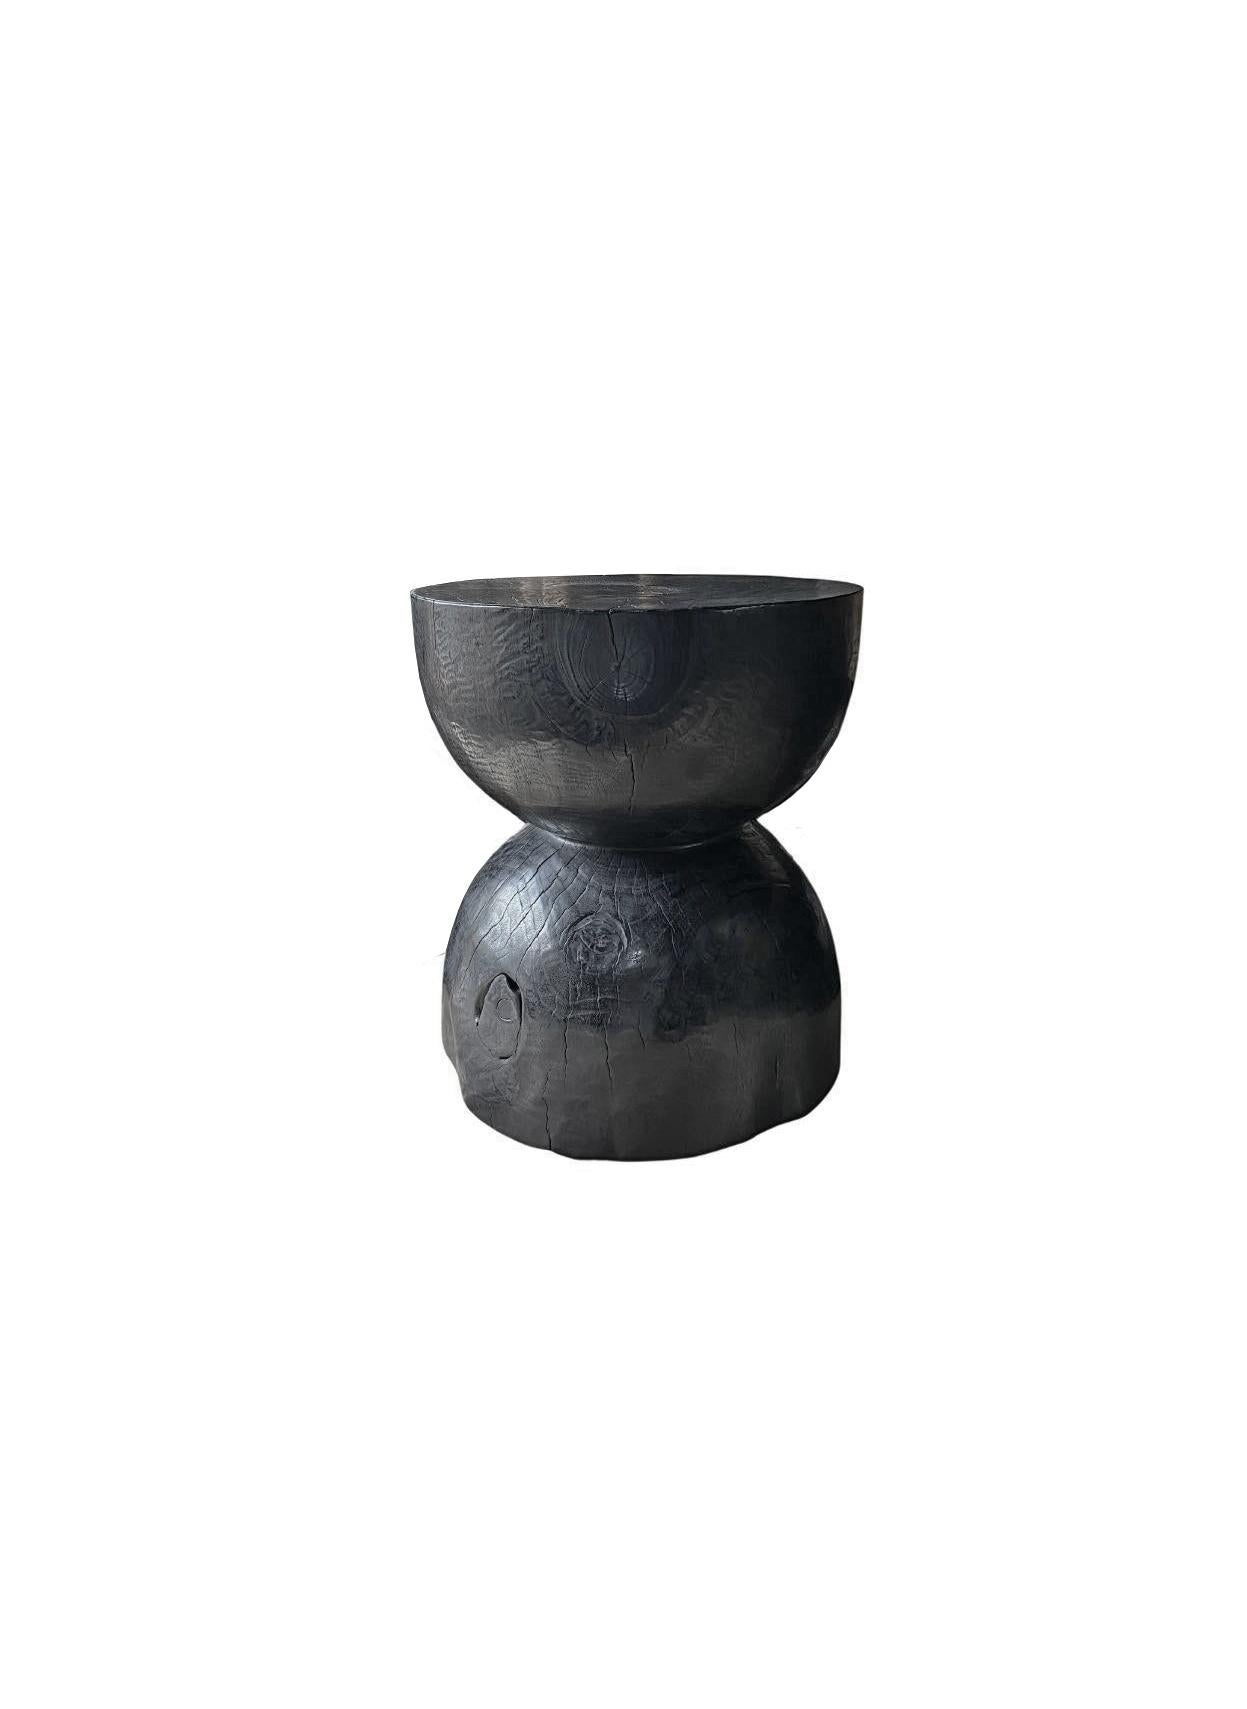 A wonderfully sculptural side table. Its rich black pigment was achieved through burning the wood three times. Its neutral pigment and subtle wood texture makes it perfect for any space. A uniquely sculptural and versatile piece certain to invoke